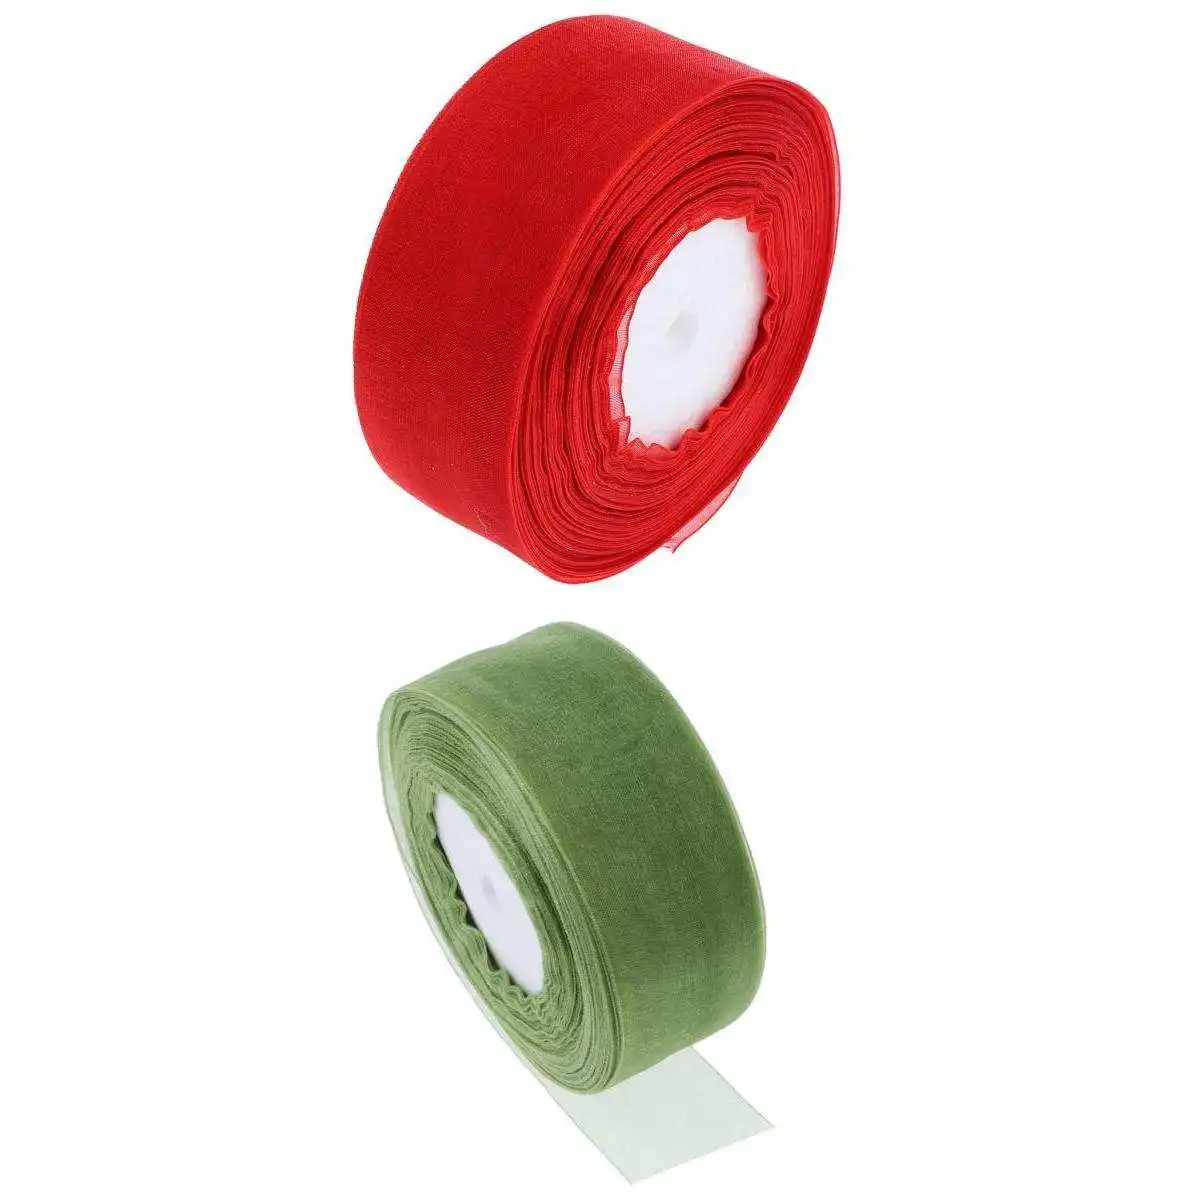 2Pcs 45m Sheer Solid Organza Ribbon Tulle Roll Spool Gift Wrapping